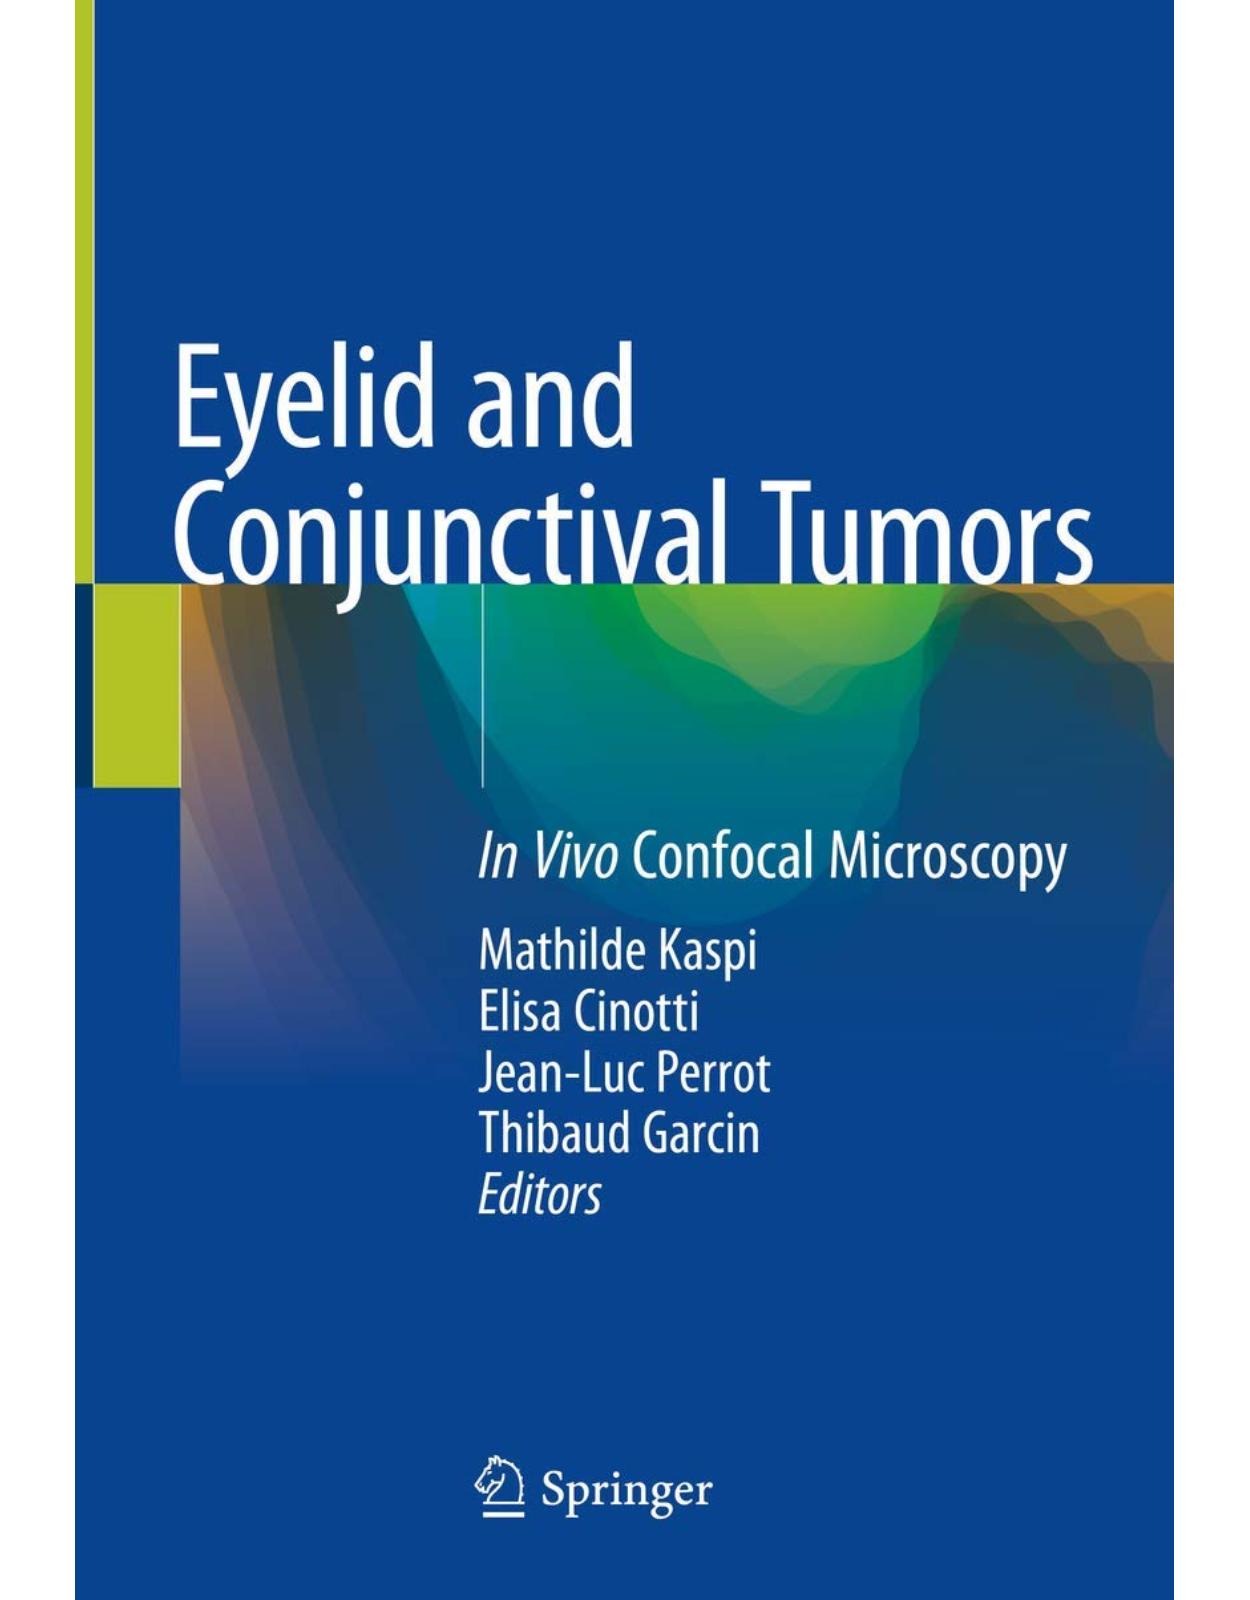 Eyelid and Conjunctival Tumors: In Vivo Confocal Microscopy